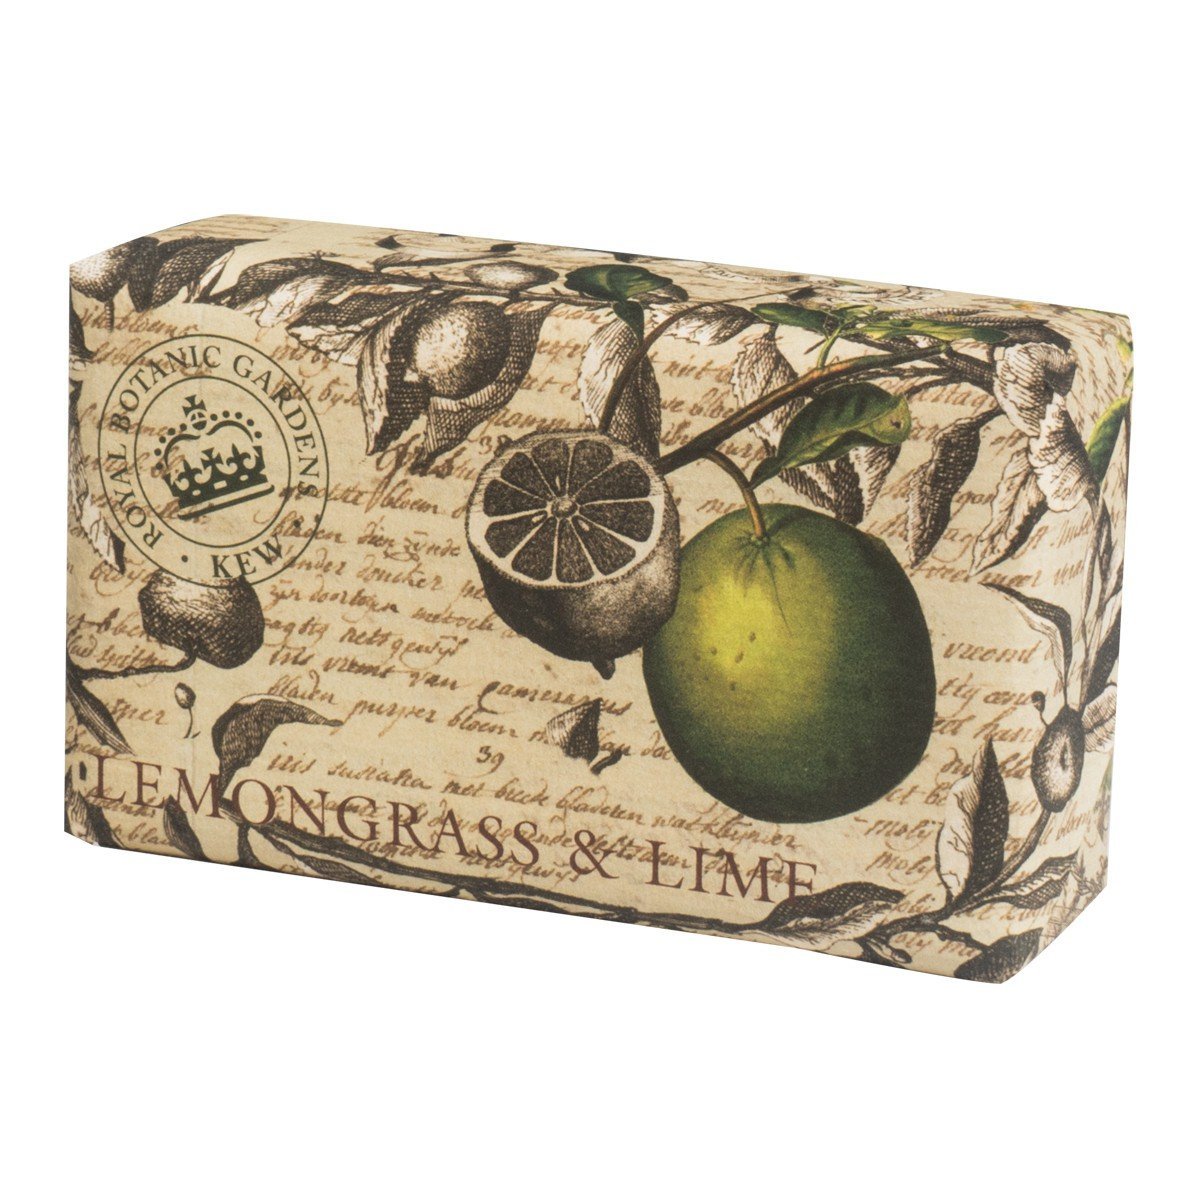 Lemon Grass and Lime Soap - Minimax